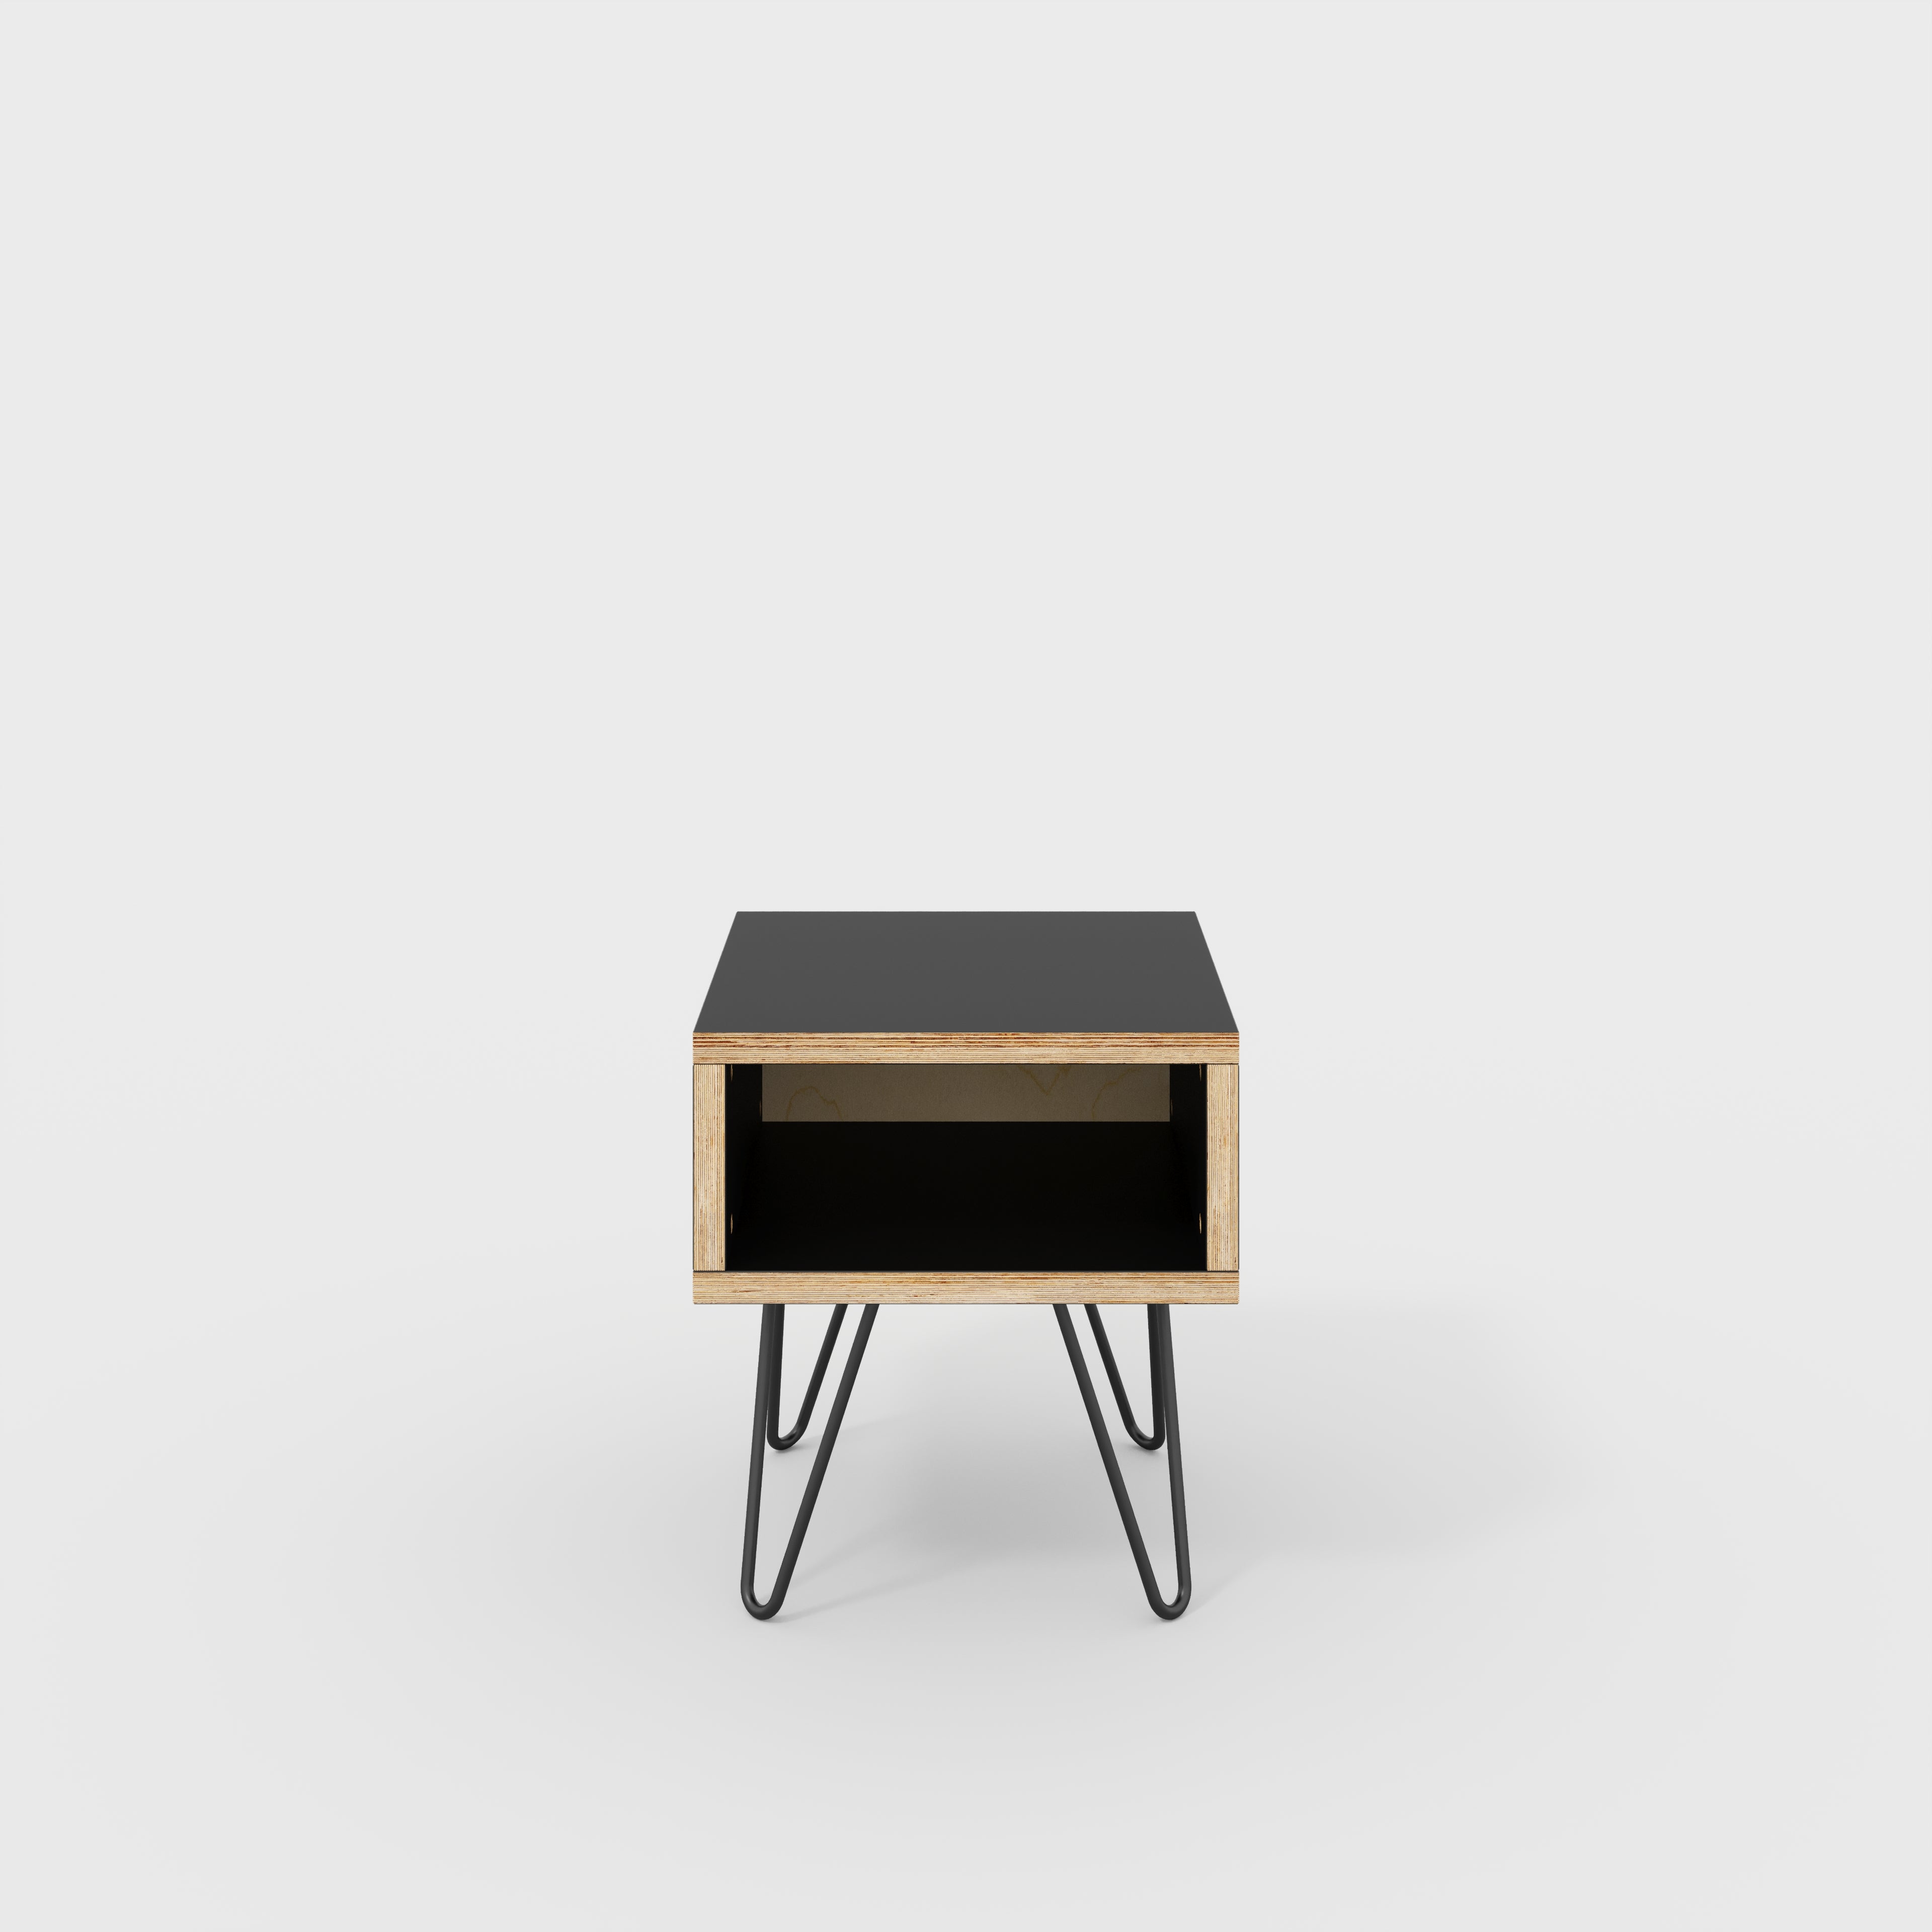 Bedside Table with Box Storage and Black Hairpin Legs - Formica Diamond Black - 400(w) x 400(d) x 450(h)